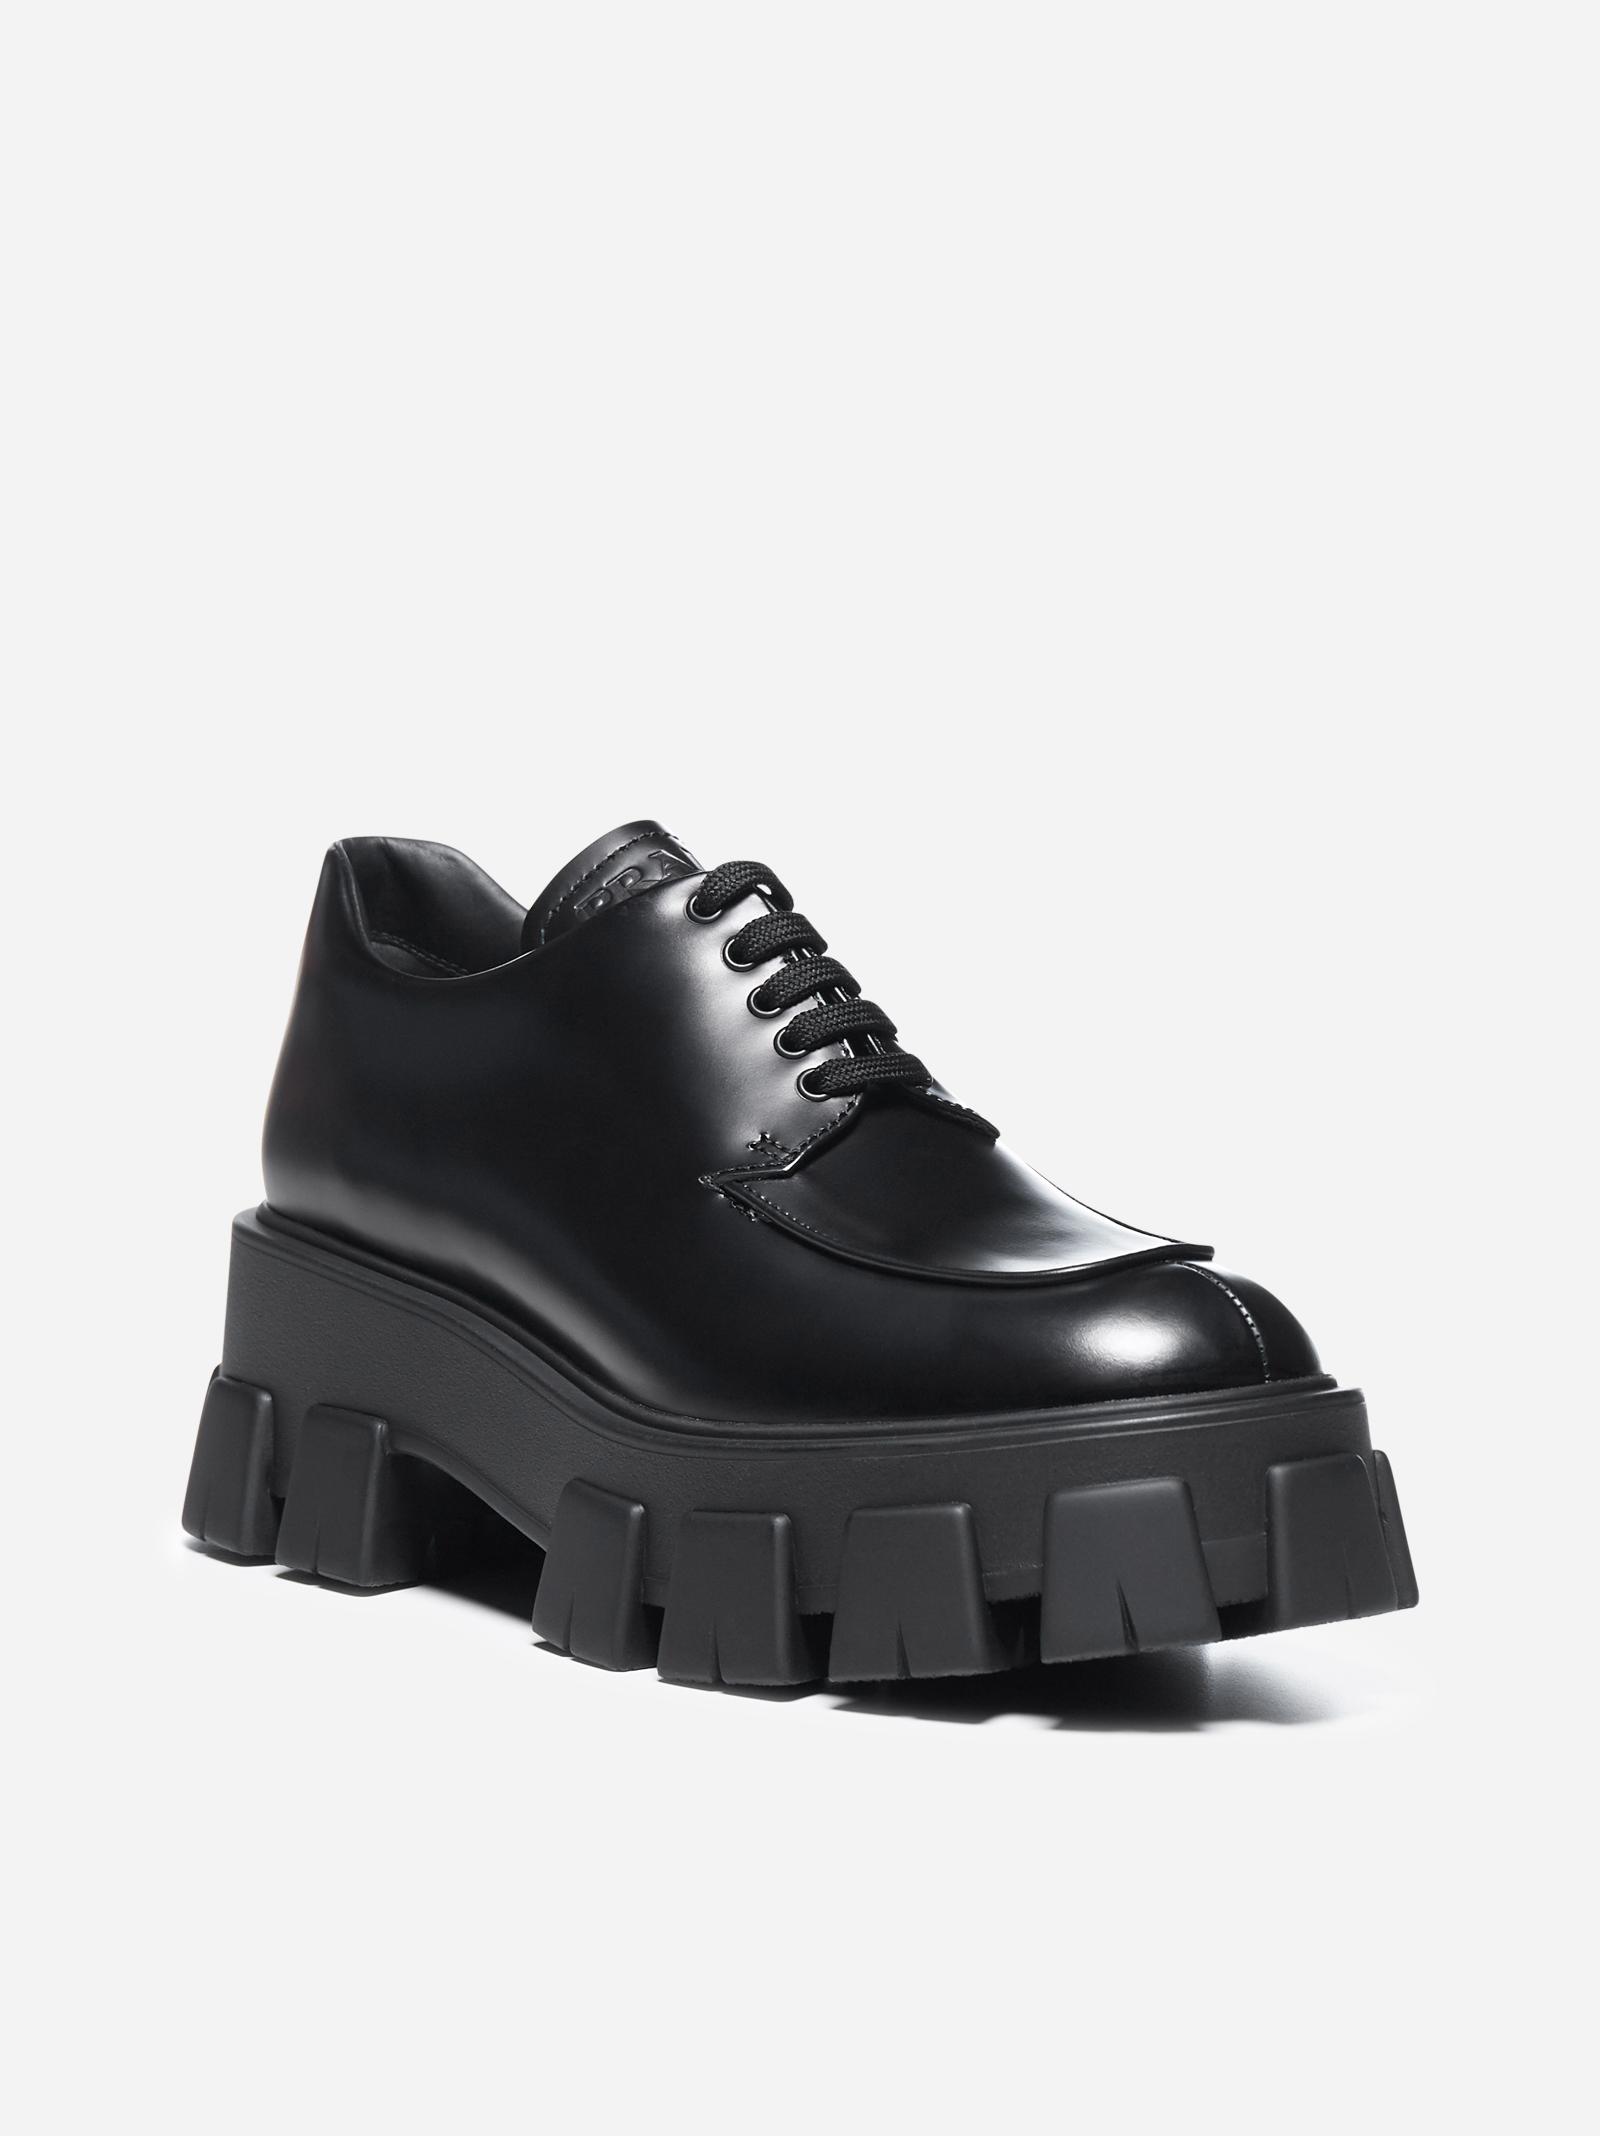 Prada Brushed Leather Derby Shoes With Chunky Sole in Black - Lyst